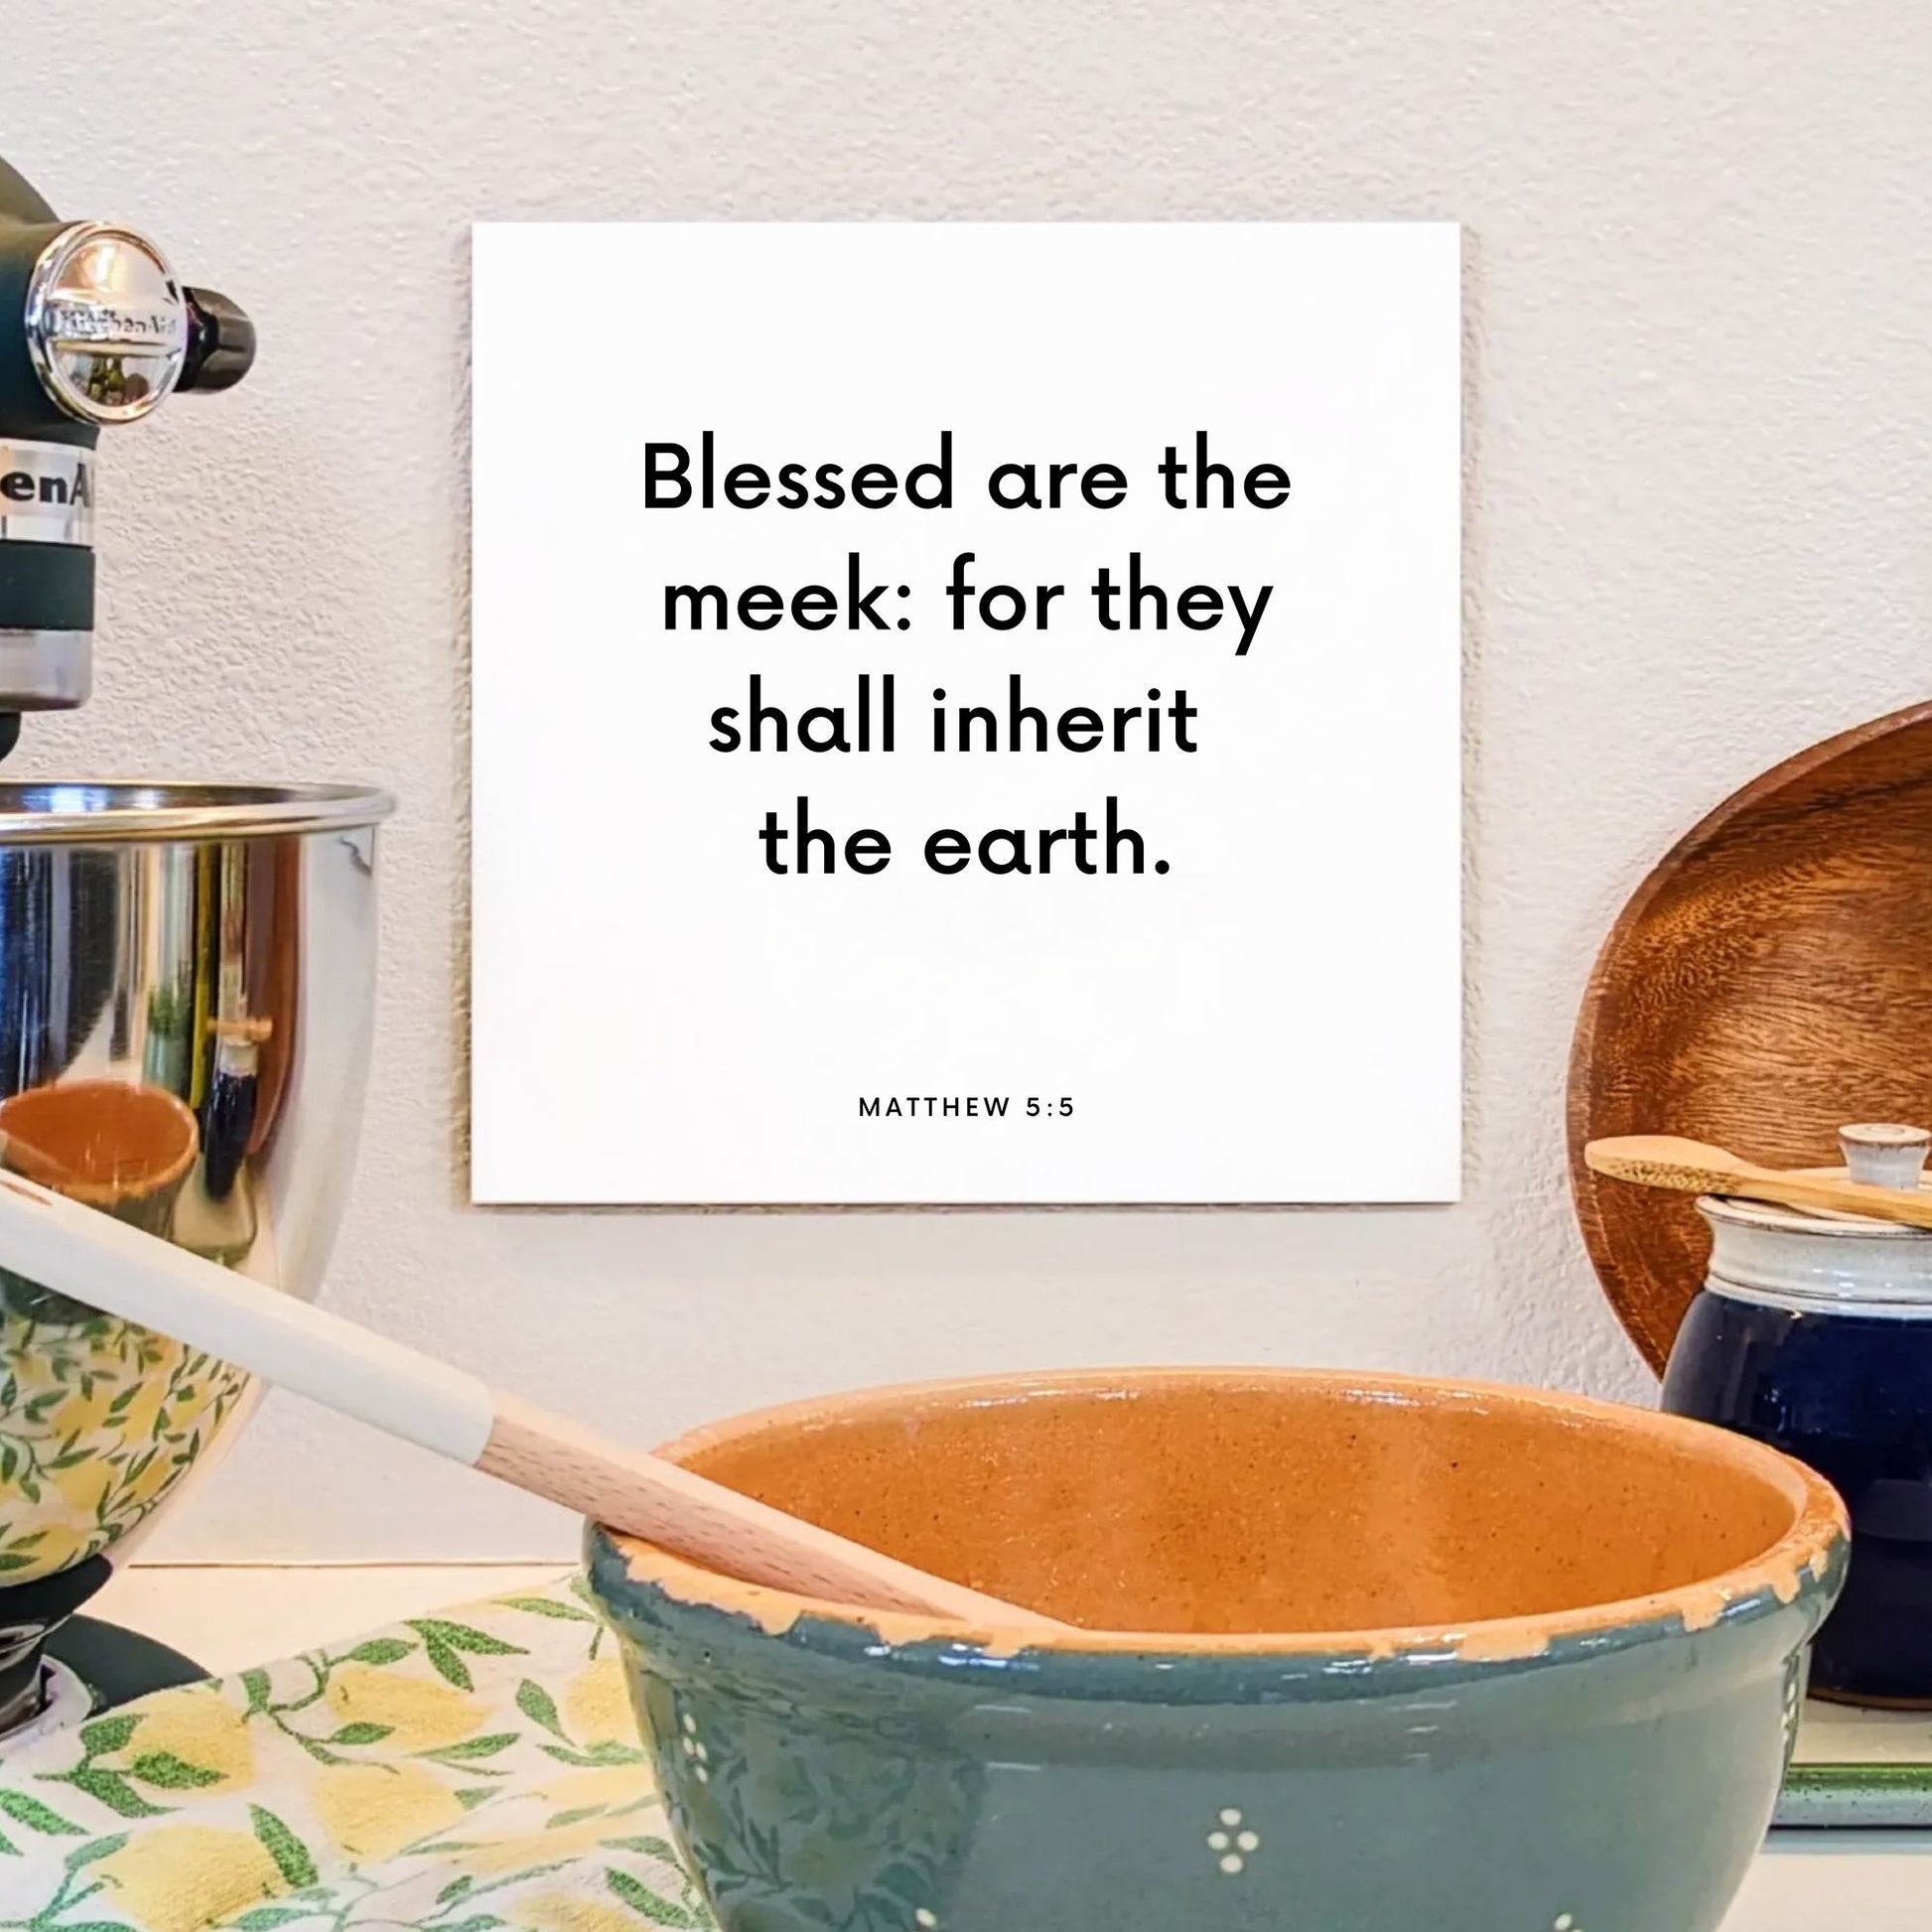 Kitchen mouting of the scripture tile for Matthew 5:5 - "Blessed are the meek: for they shall inherit the earth"